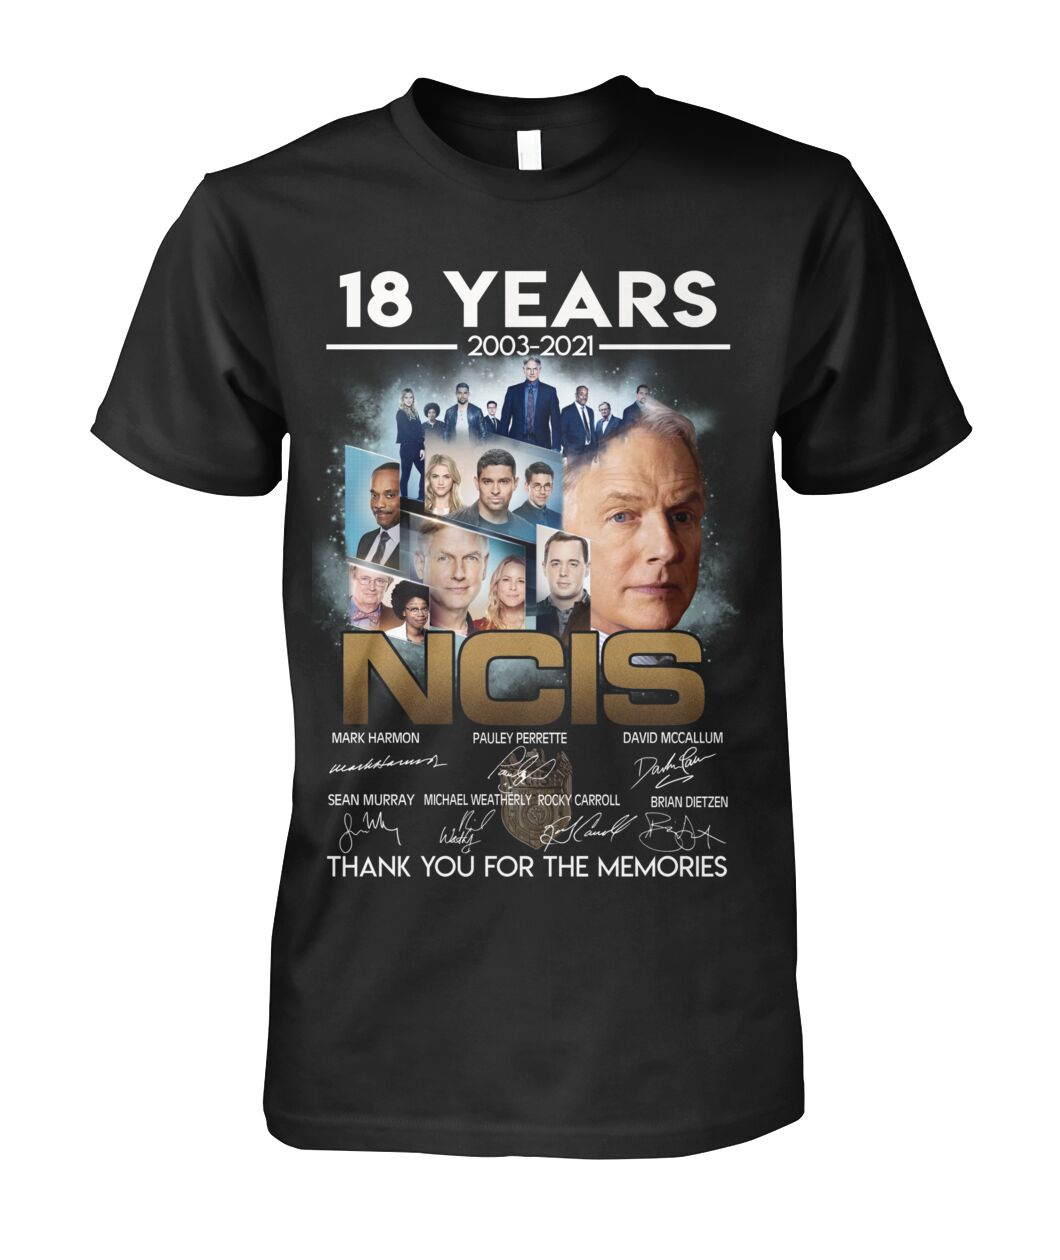 18 years 2003 2021 NCIS signatures thank you for the memories shirt, hoodie and sweatshirt